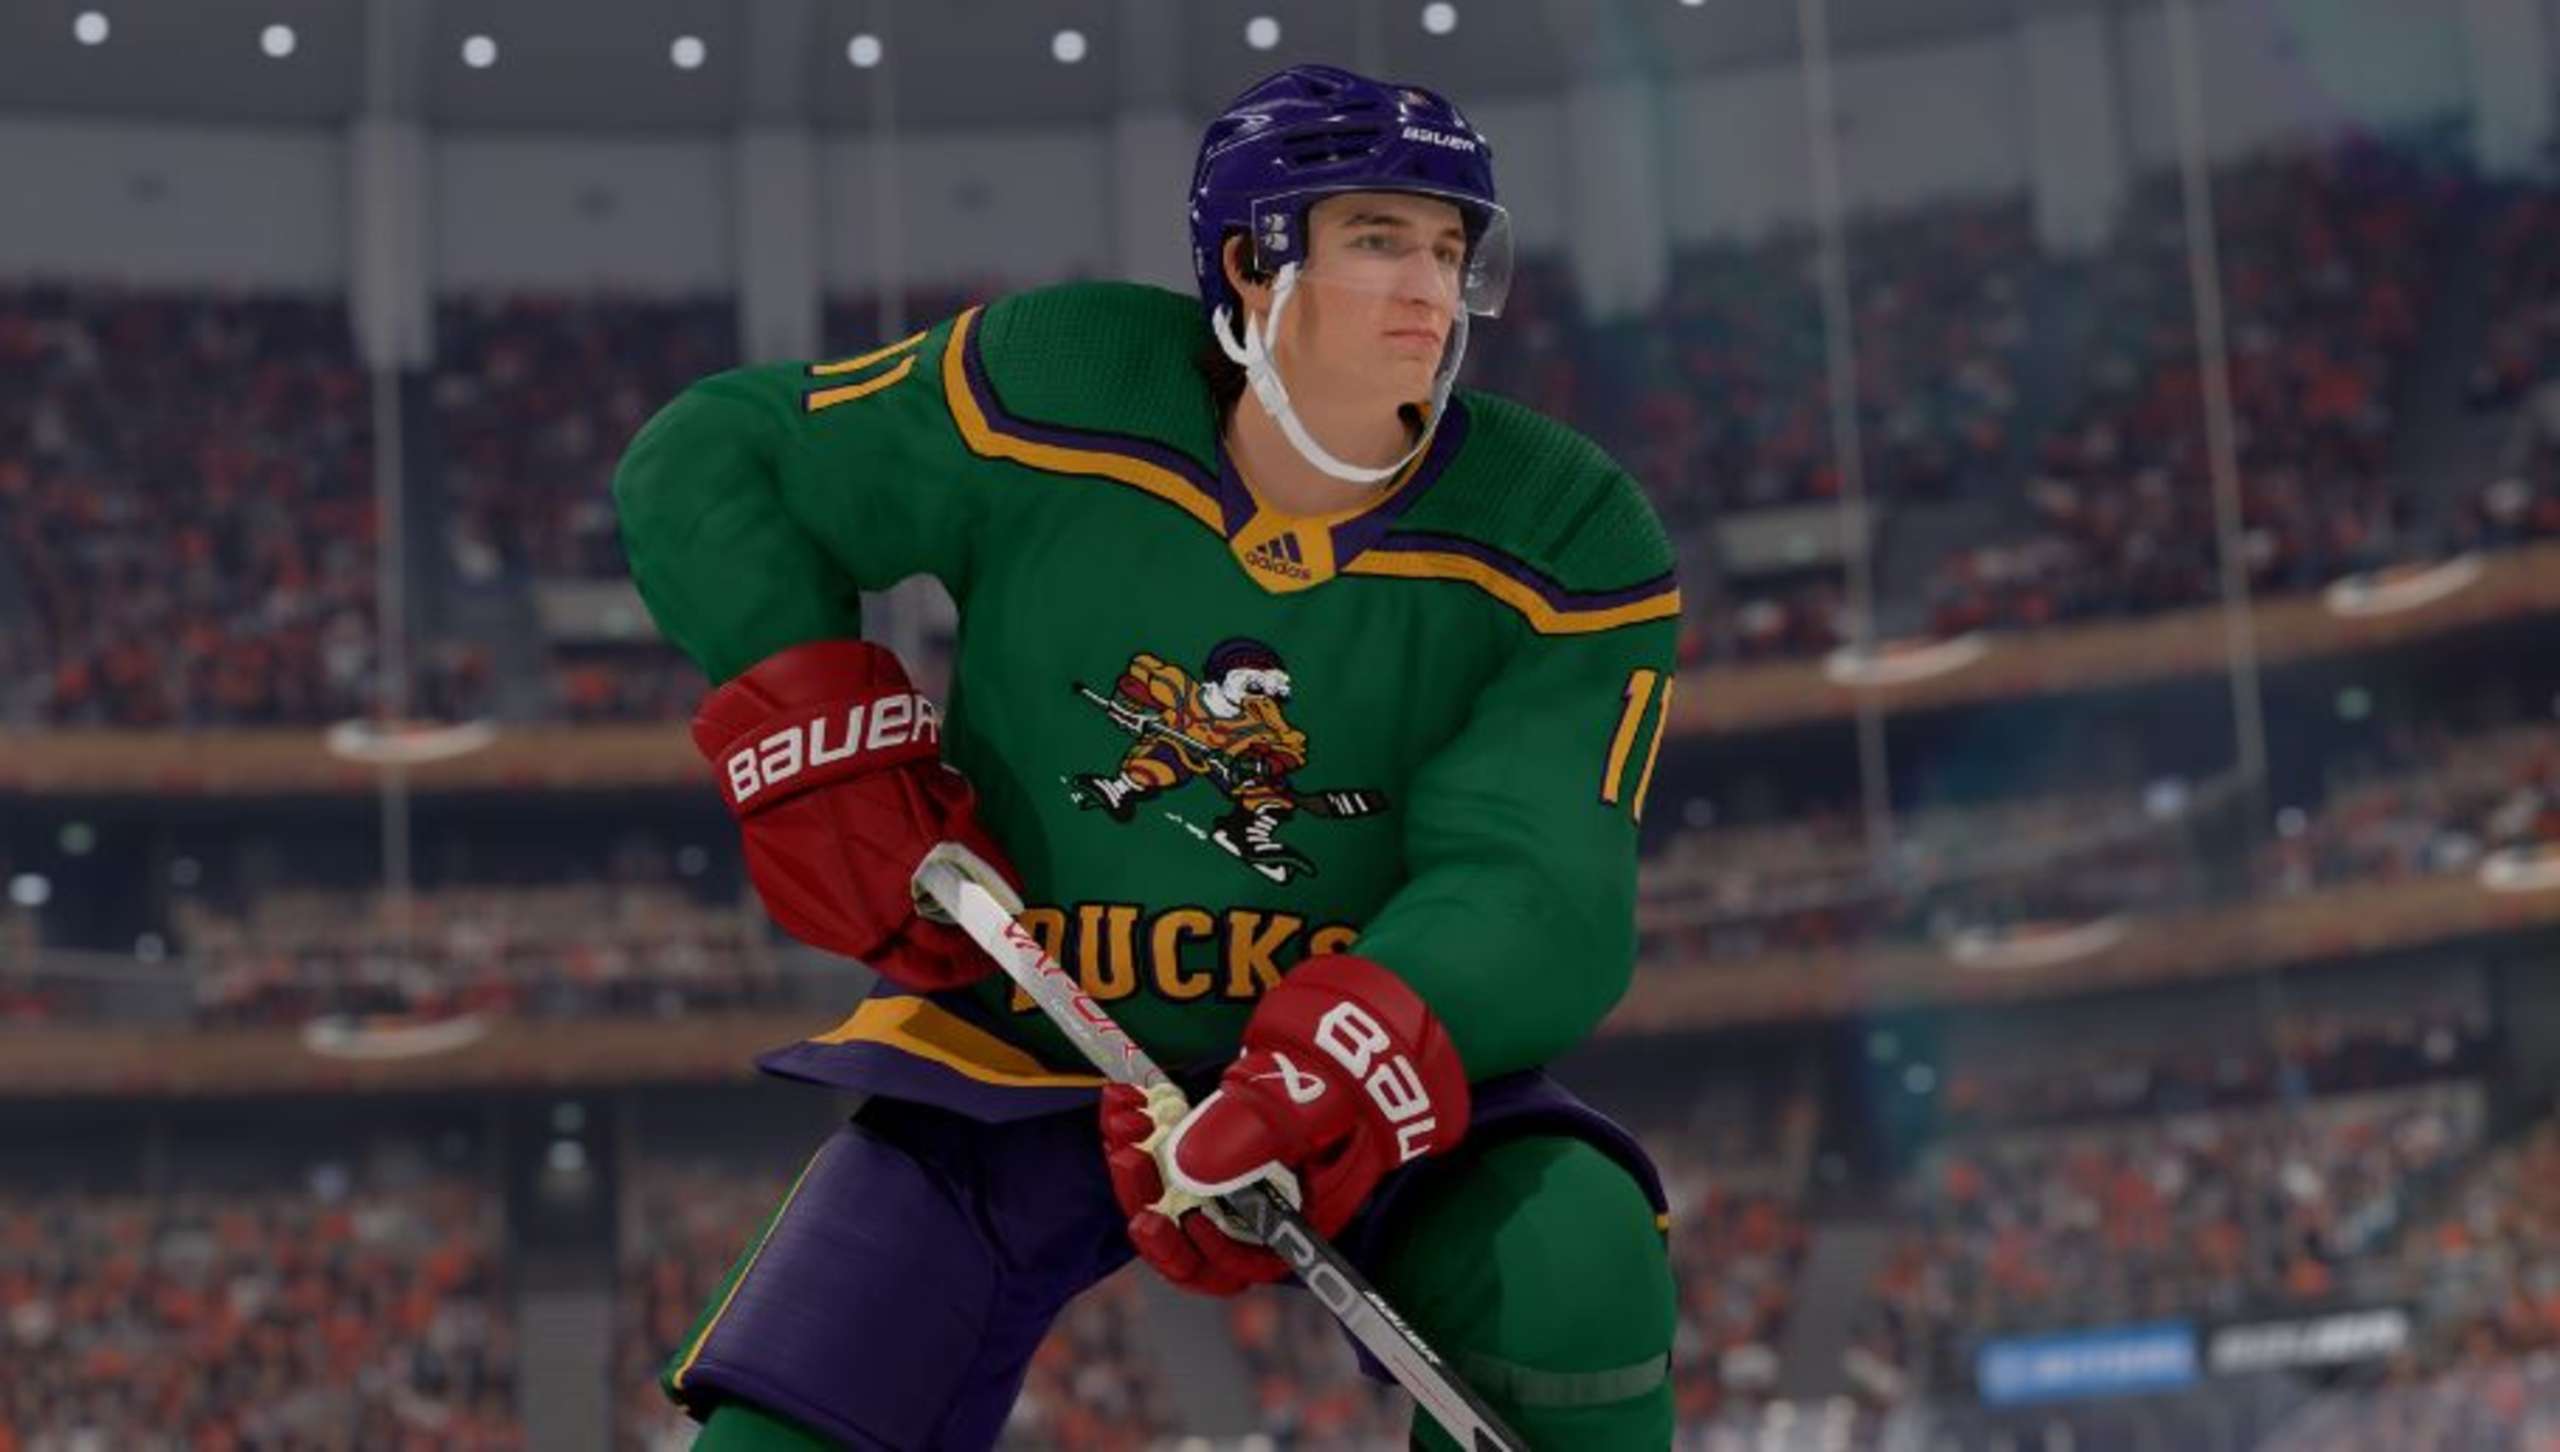 Thirty Years After The Disney Classic The Mighty Ducks Premiere, NHL 23 Gives Players A Chance To Don The Team’s Uniforms In Several Settings